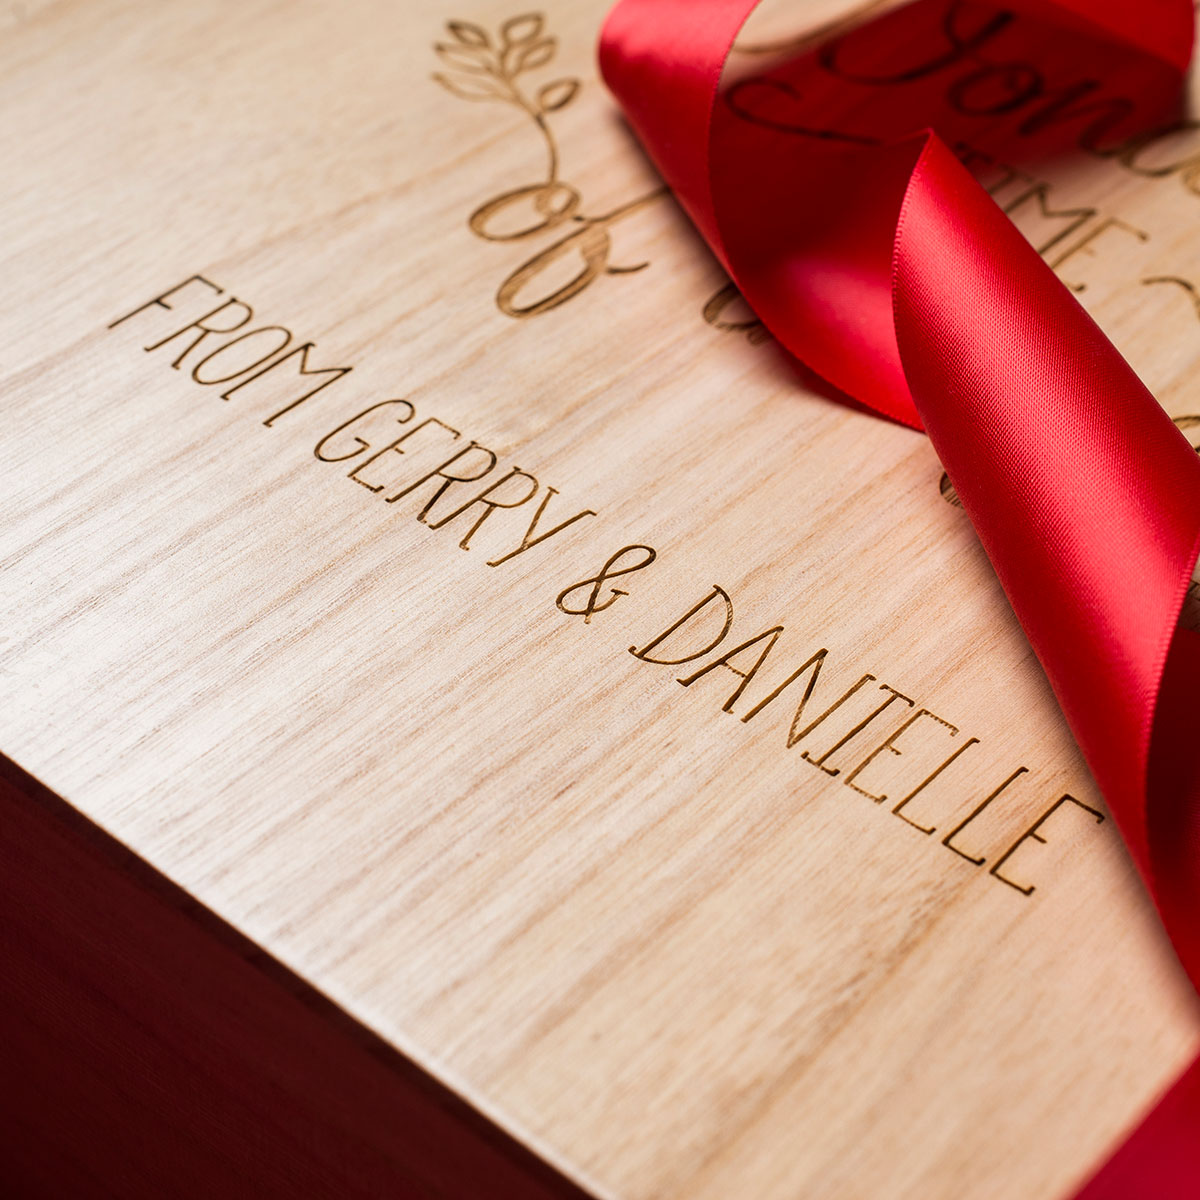 Personalised 3 Bottle Luxury Wooden Wine Box - It's Most Wonderful Time Of The Year